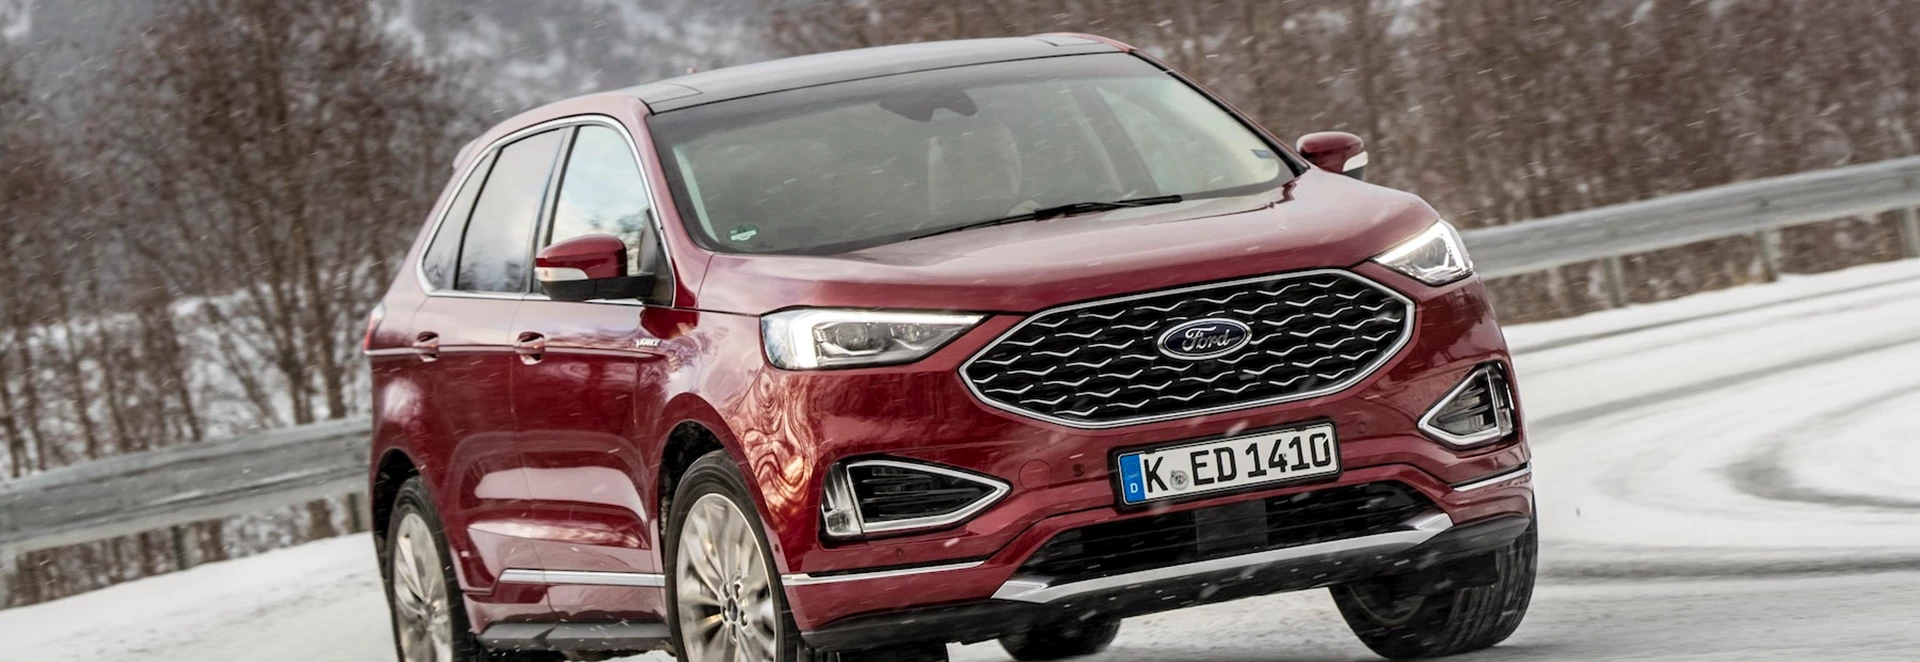 Ford Edge 2020 review